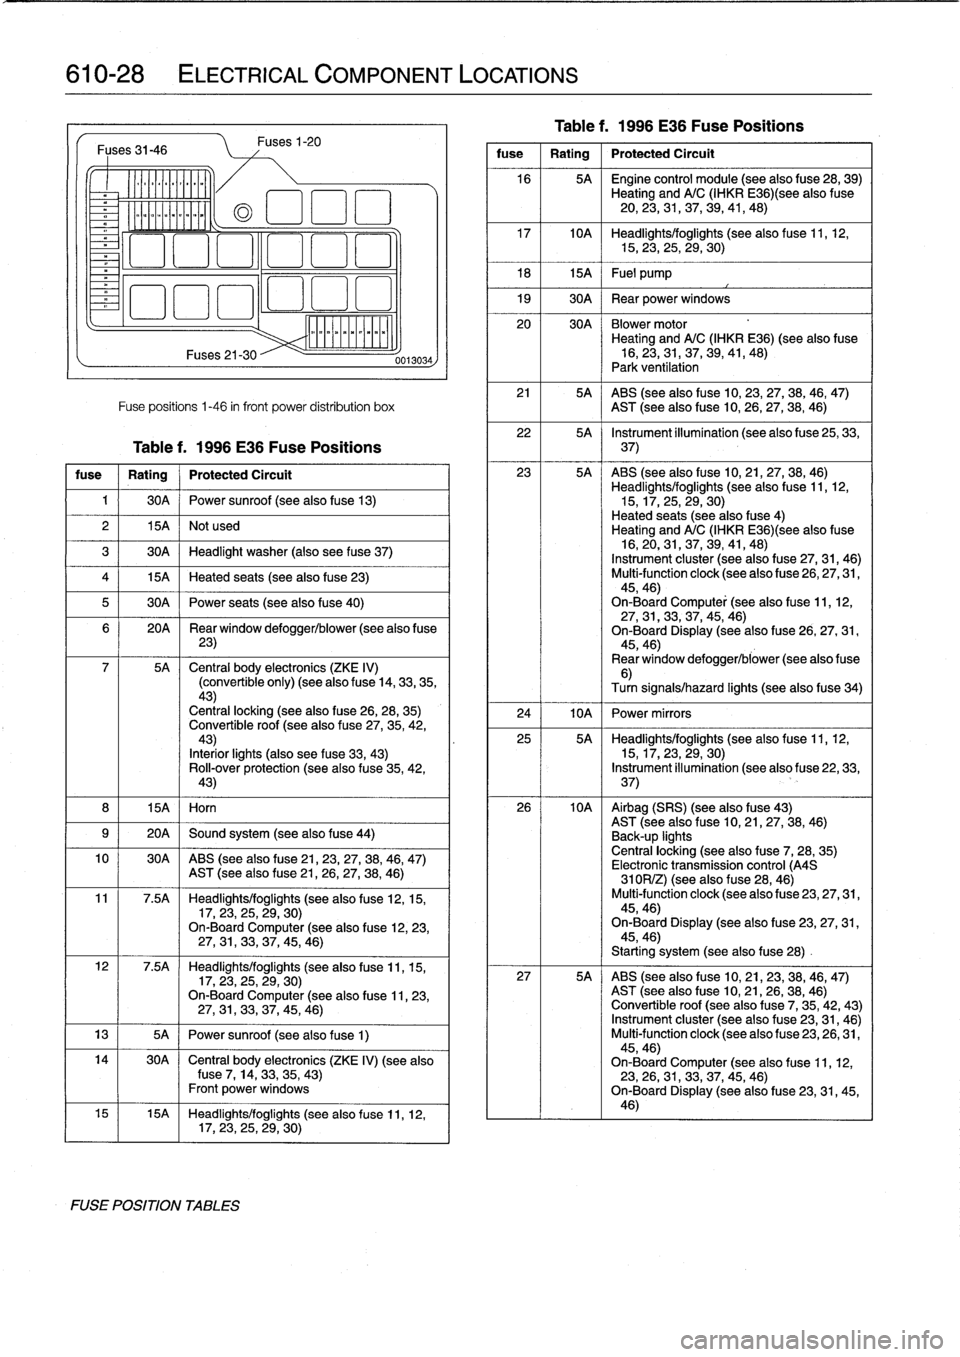 BMW M3 1993 E36 Owners Manual 
610-28

	

ELECTRICAL
COMPONENT
LOCATIONS

Fuses
31-46

k
Lírcoo)]
LE

7a
Maz

Fuses
21-30

Fuse
positions
1-46
in
front
power
distribution
box
Table
f
.
1996
E36
Fuse
Positions

fuse

	

Rating

	
